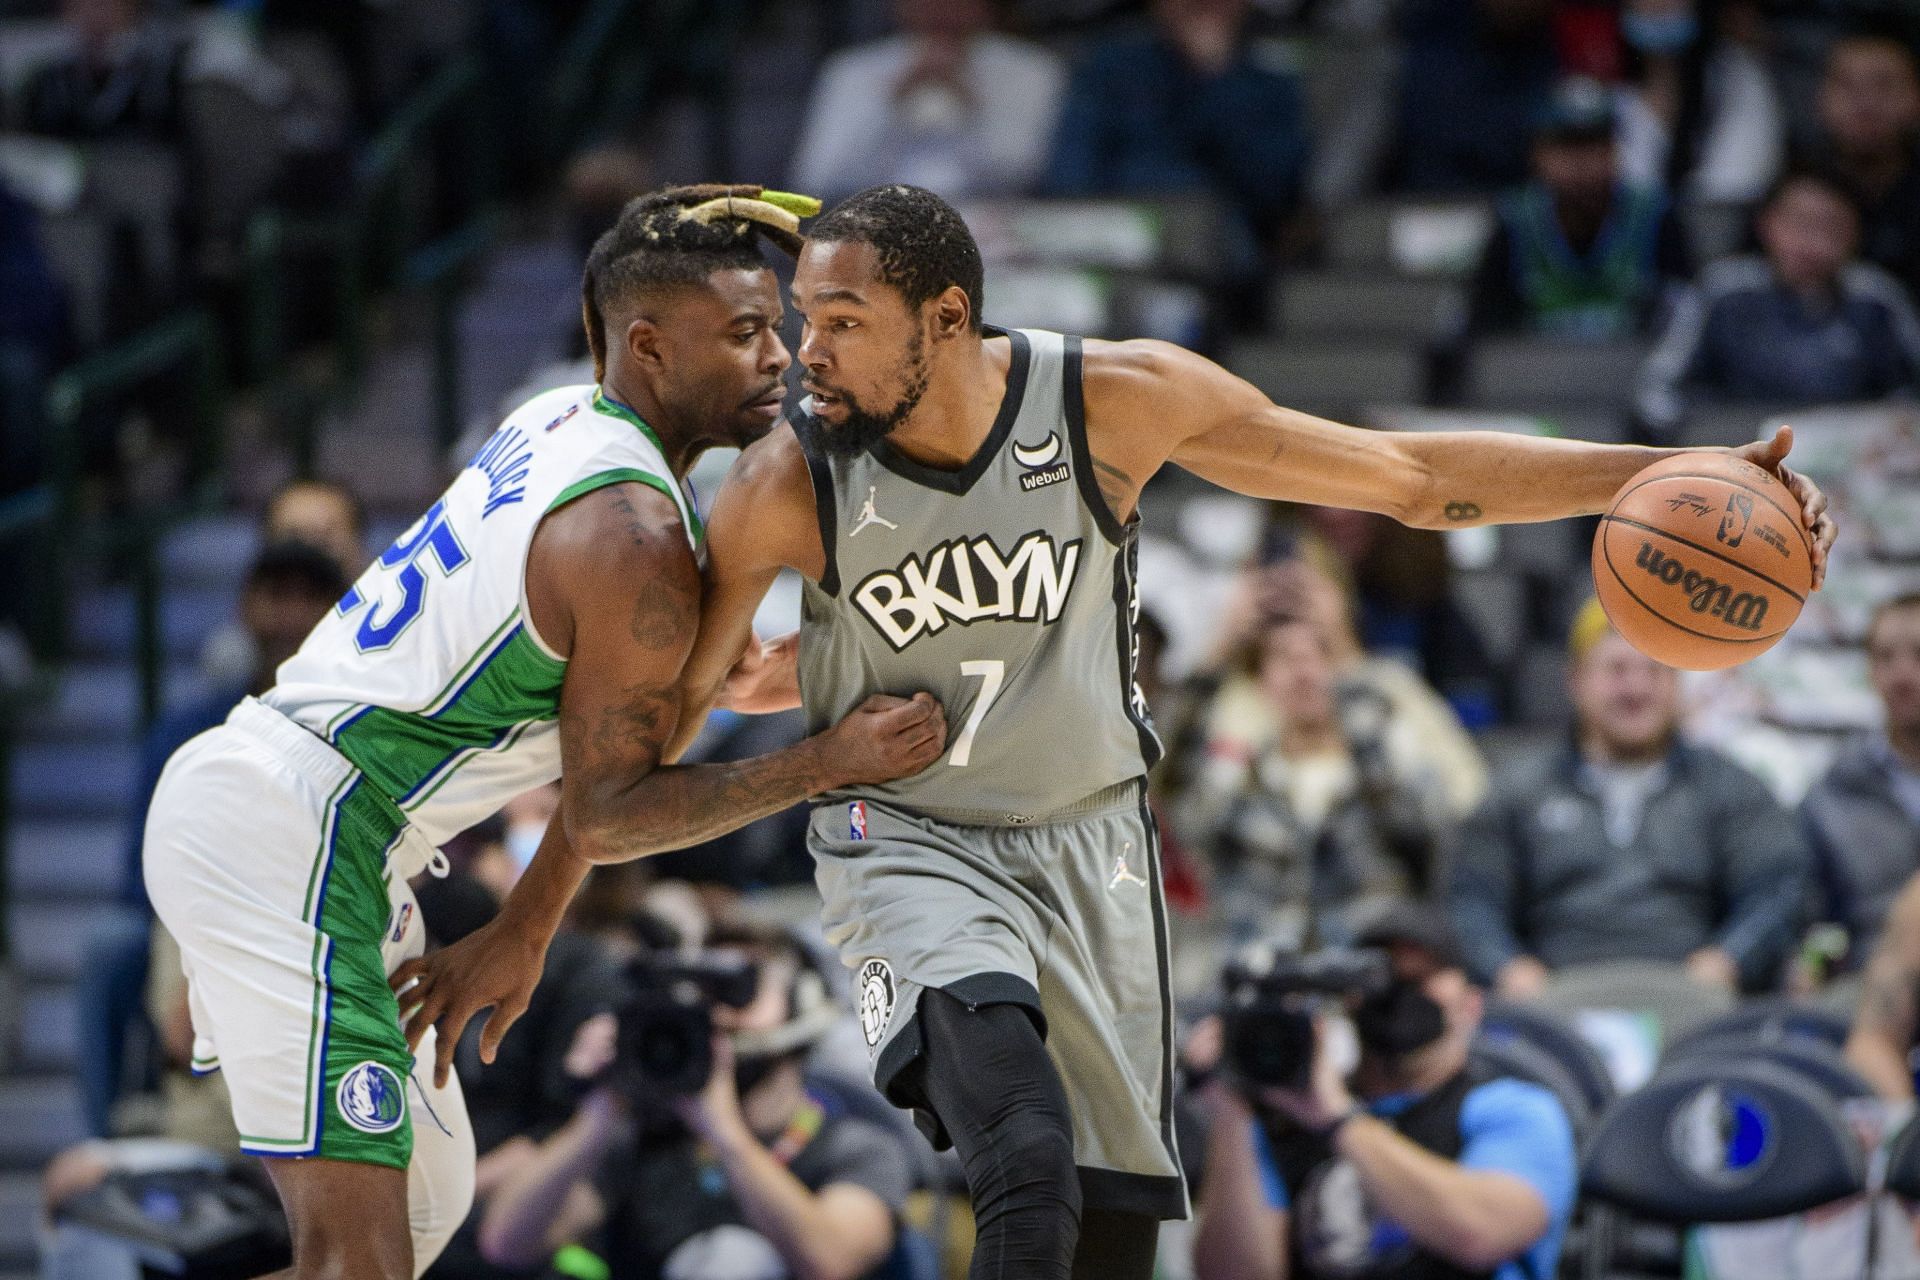 The Brooklyn Nets and Dallas Mavericks just played one of the most exciting games this season. [Photo: Reuters]